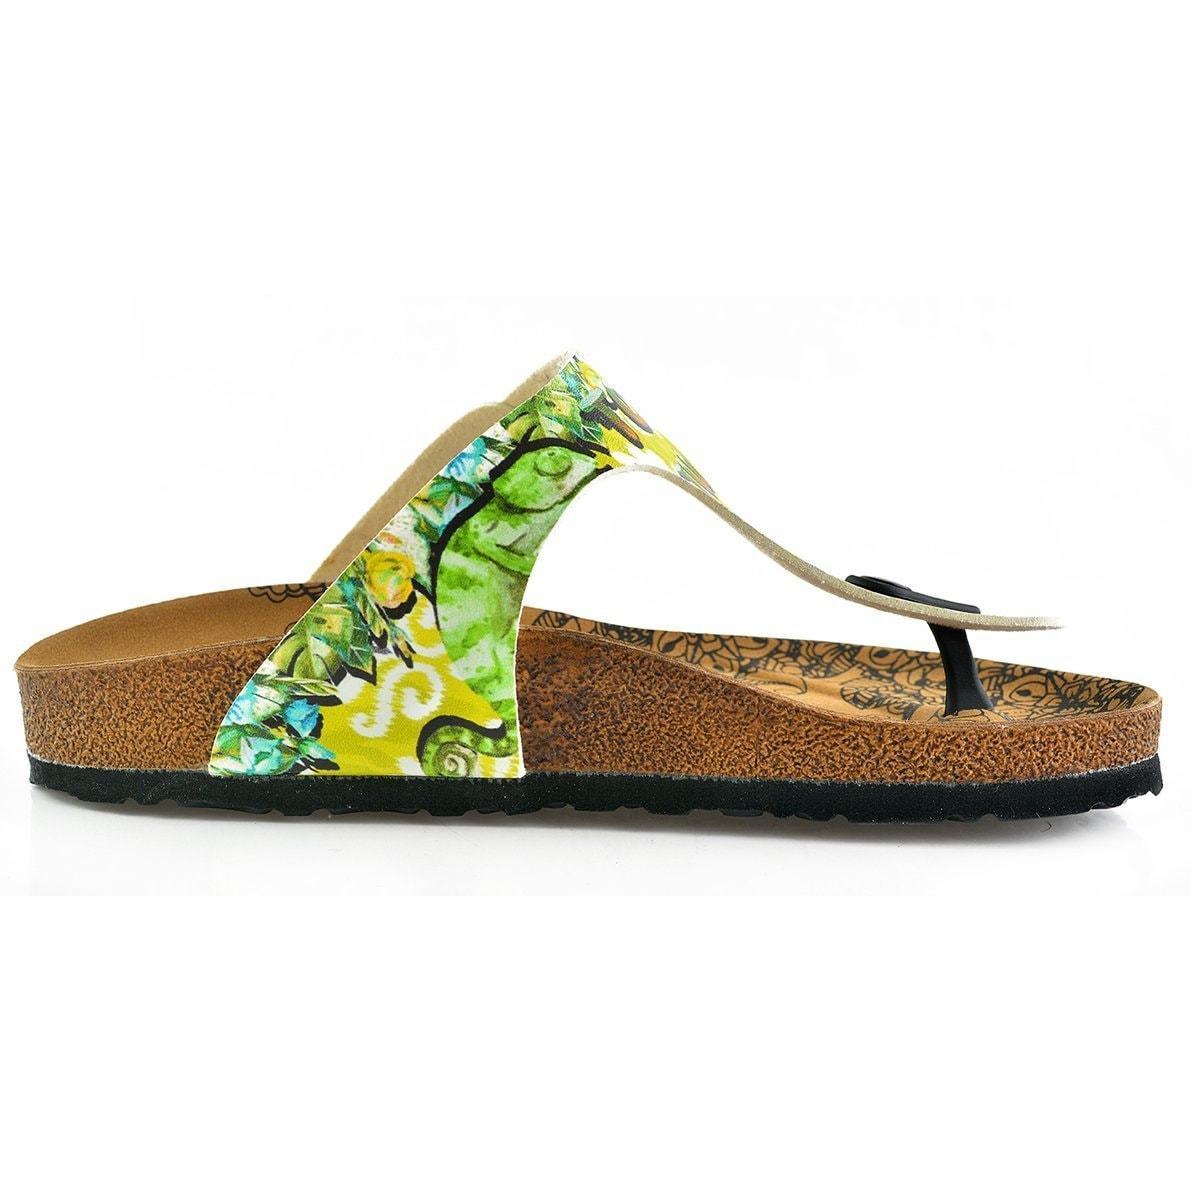 Escape to Jungle Sandal CAL508 - Goby CALCEO Sandal 